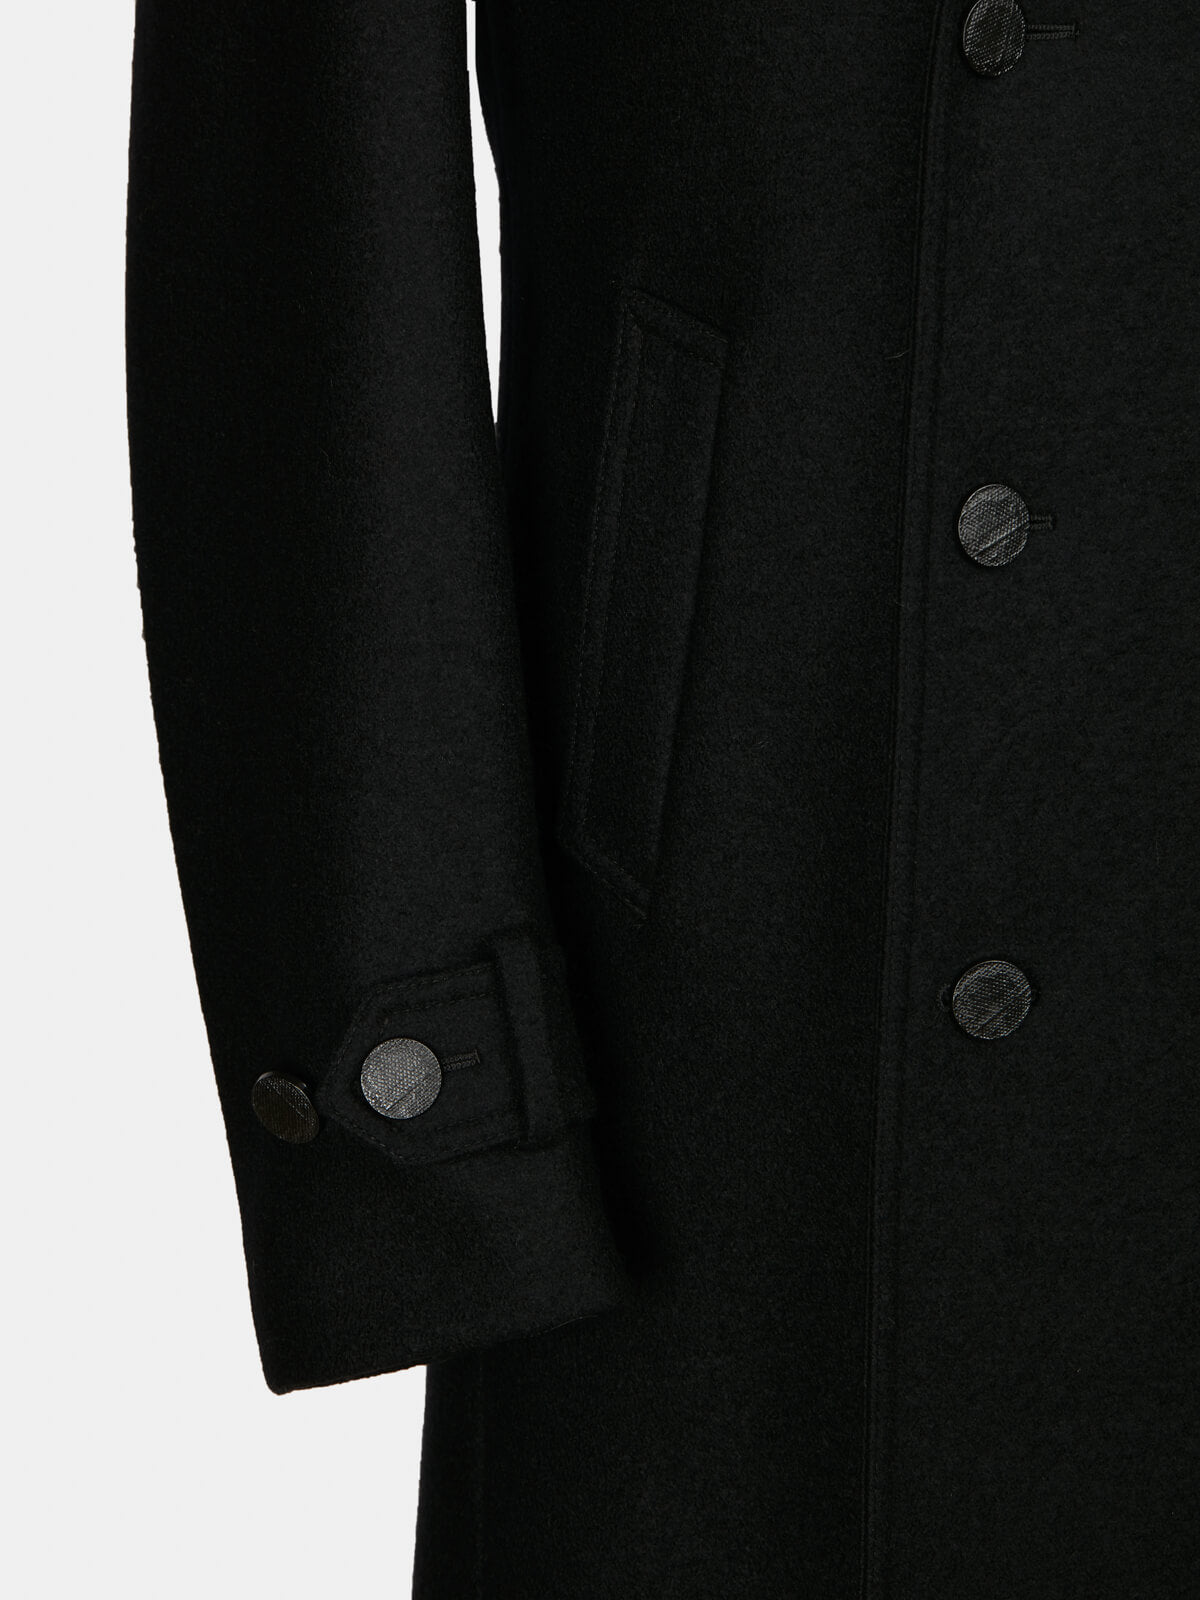 Peacoat in military cloth in wool jersey